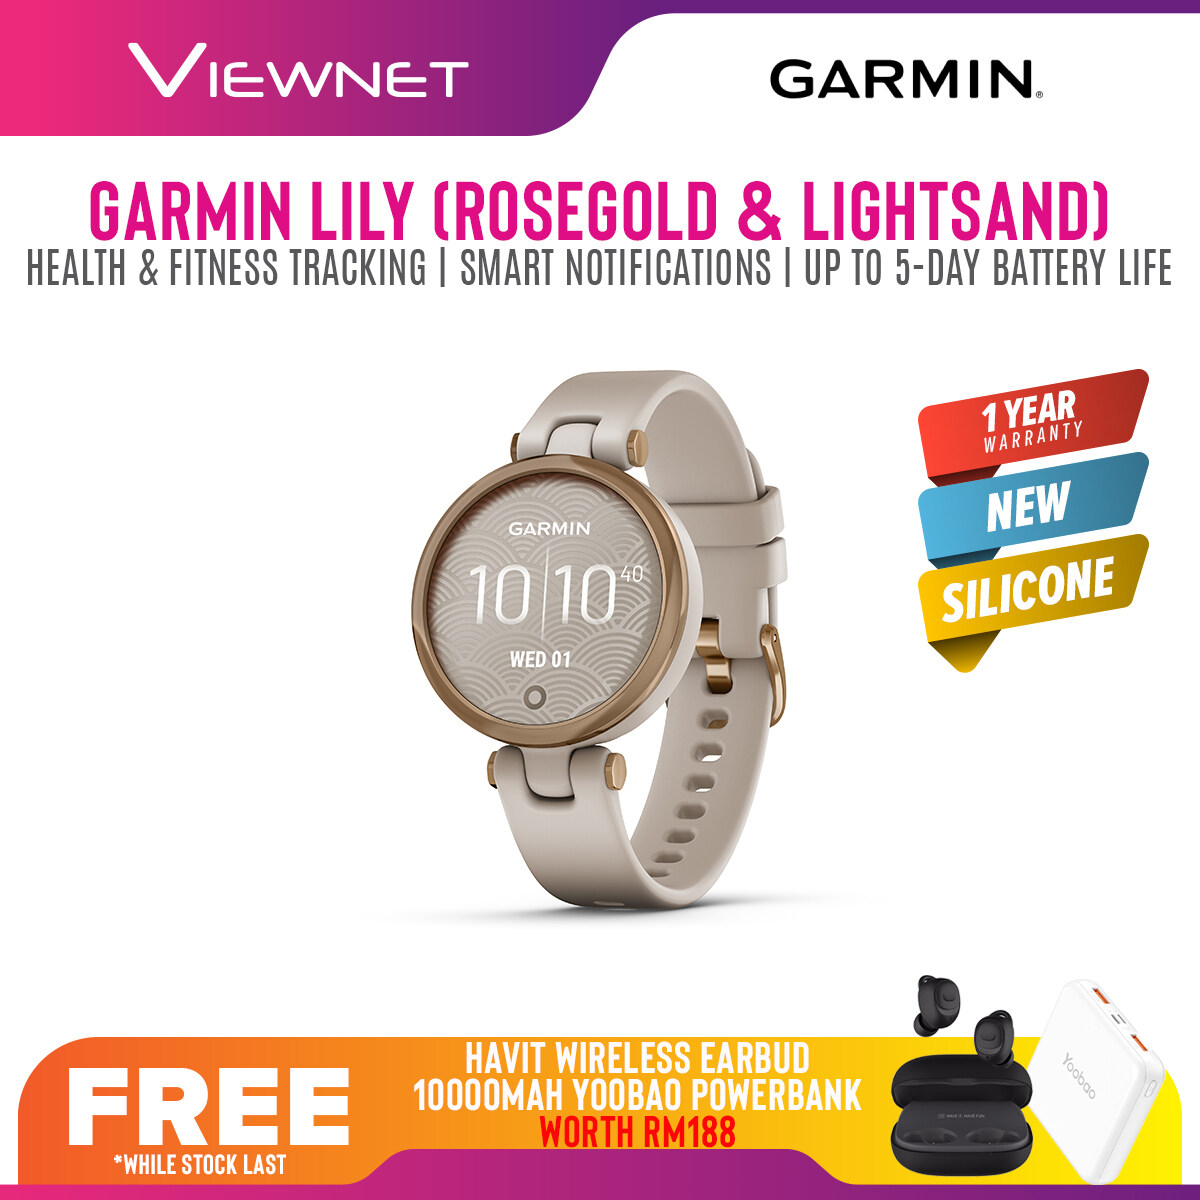 [NEW] Garmin Lily Smart Watch (Silicone) - Stylish Patterned Lens, Smart Touchscreen, Small and Fashionable smartwatch